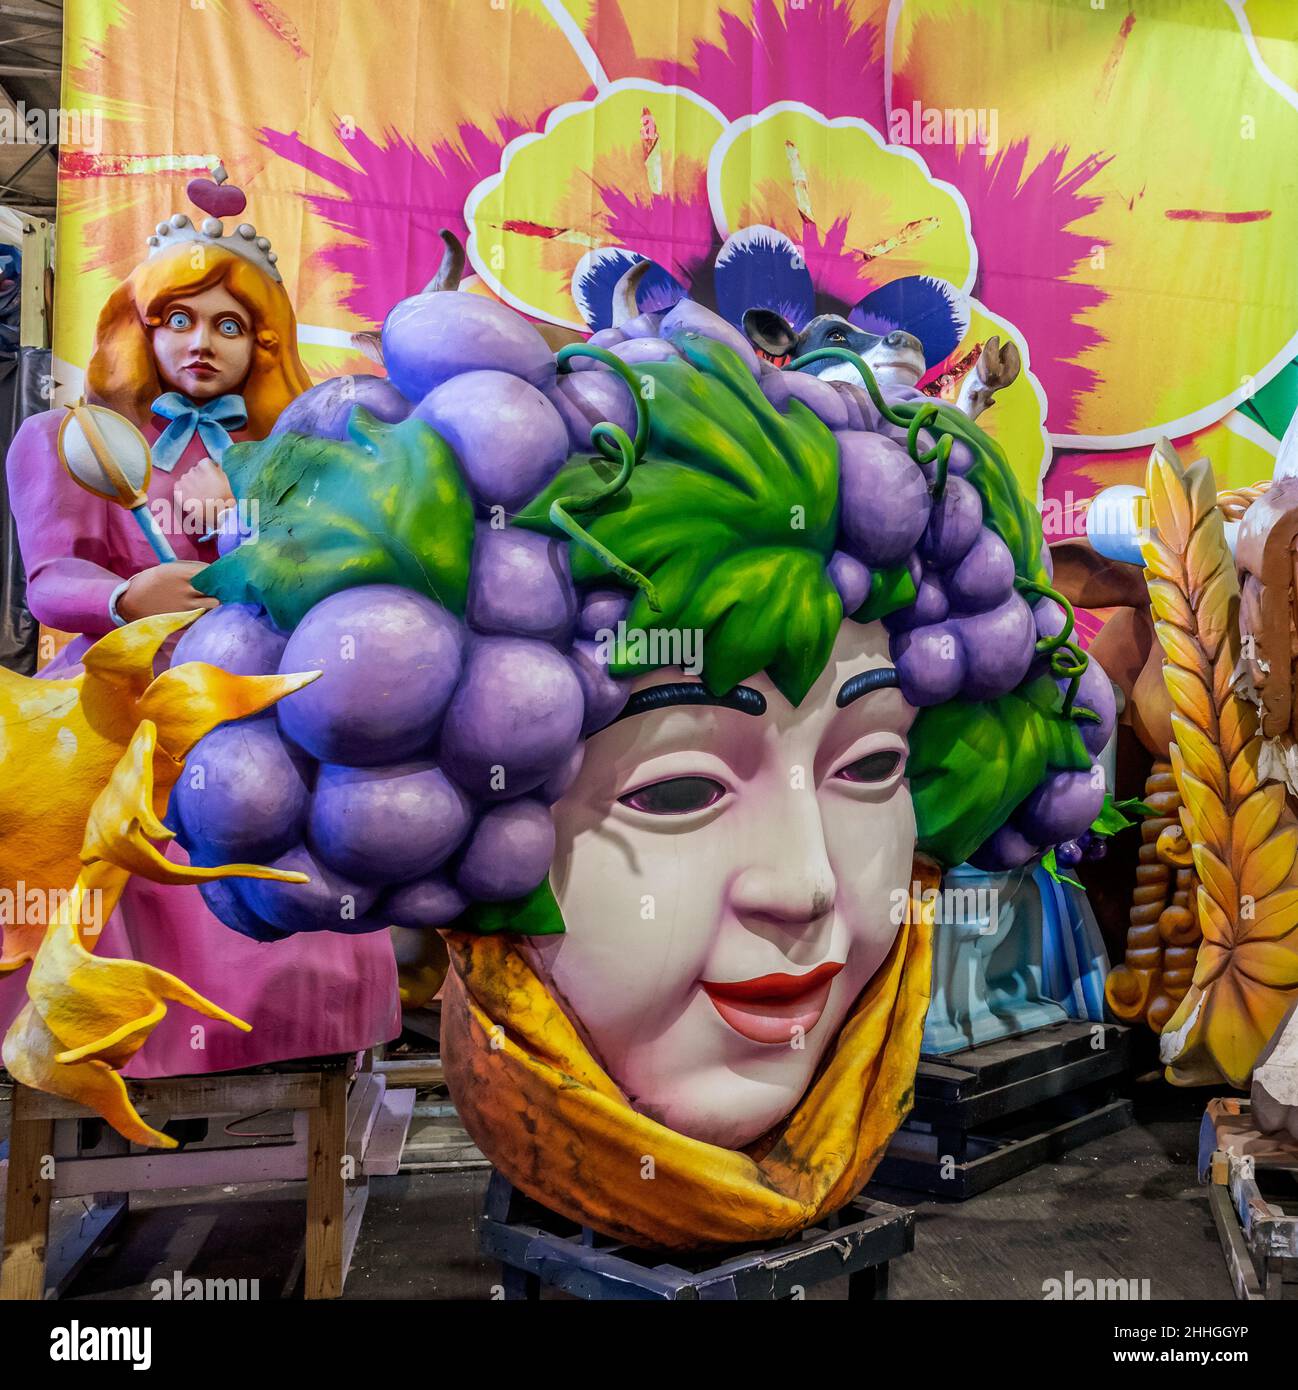 Mardi Gras World, Blaine Kern's tourist attraction and working warehouse where Mardi Gras parade floats are made in New Orleans, Louisiana, USA. Stock Photo